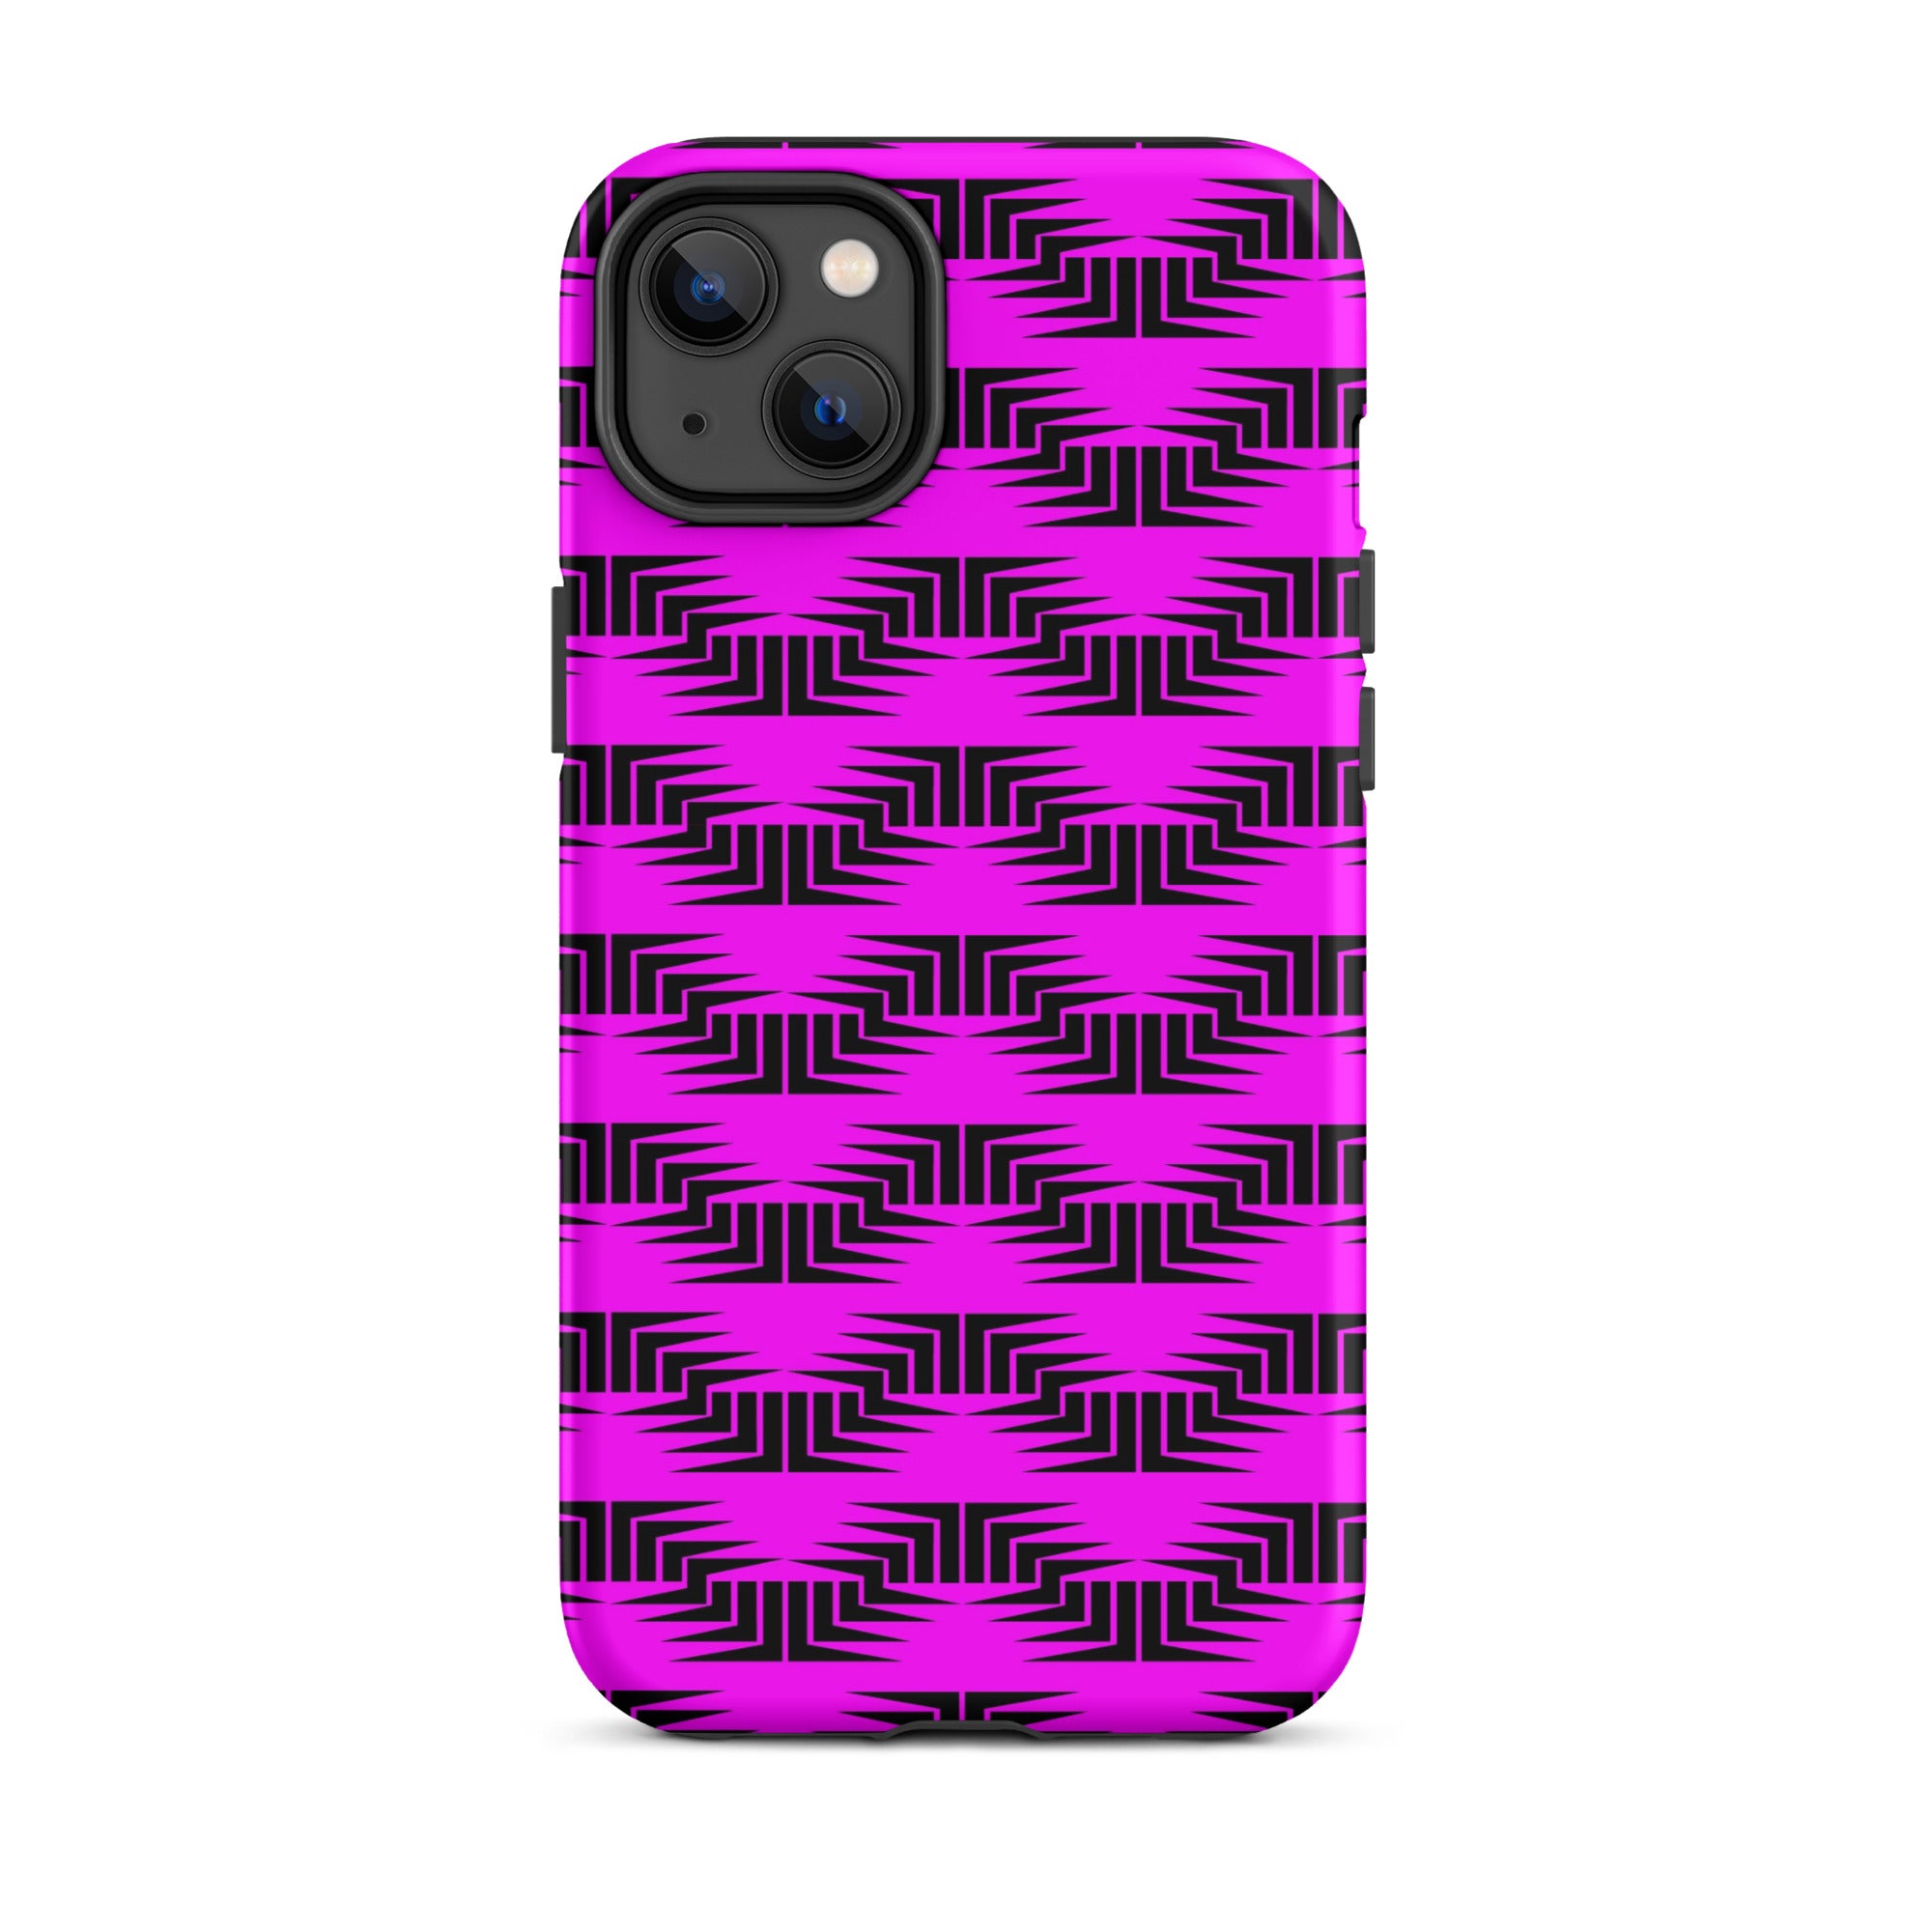 Tough iPhone Case With Frog Foot Designs